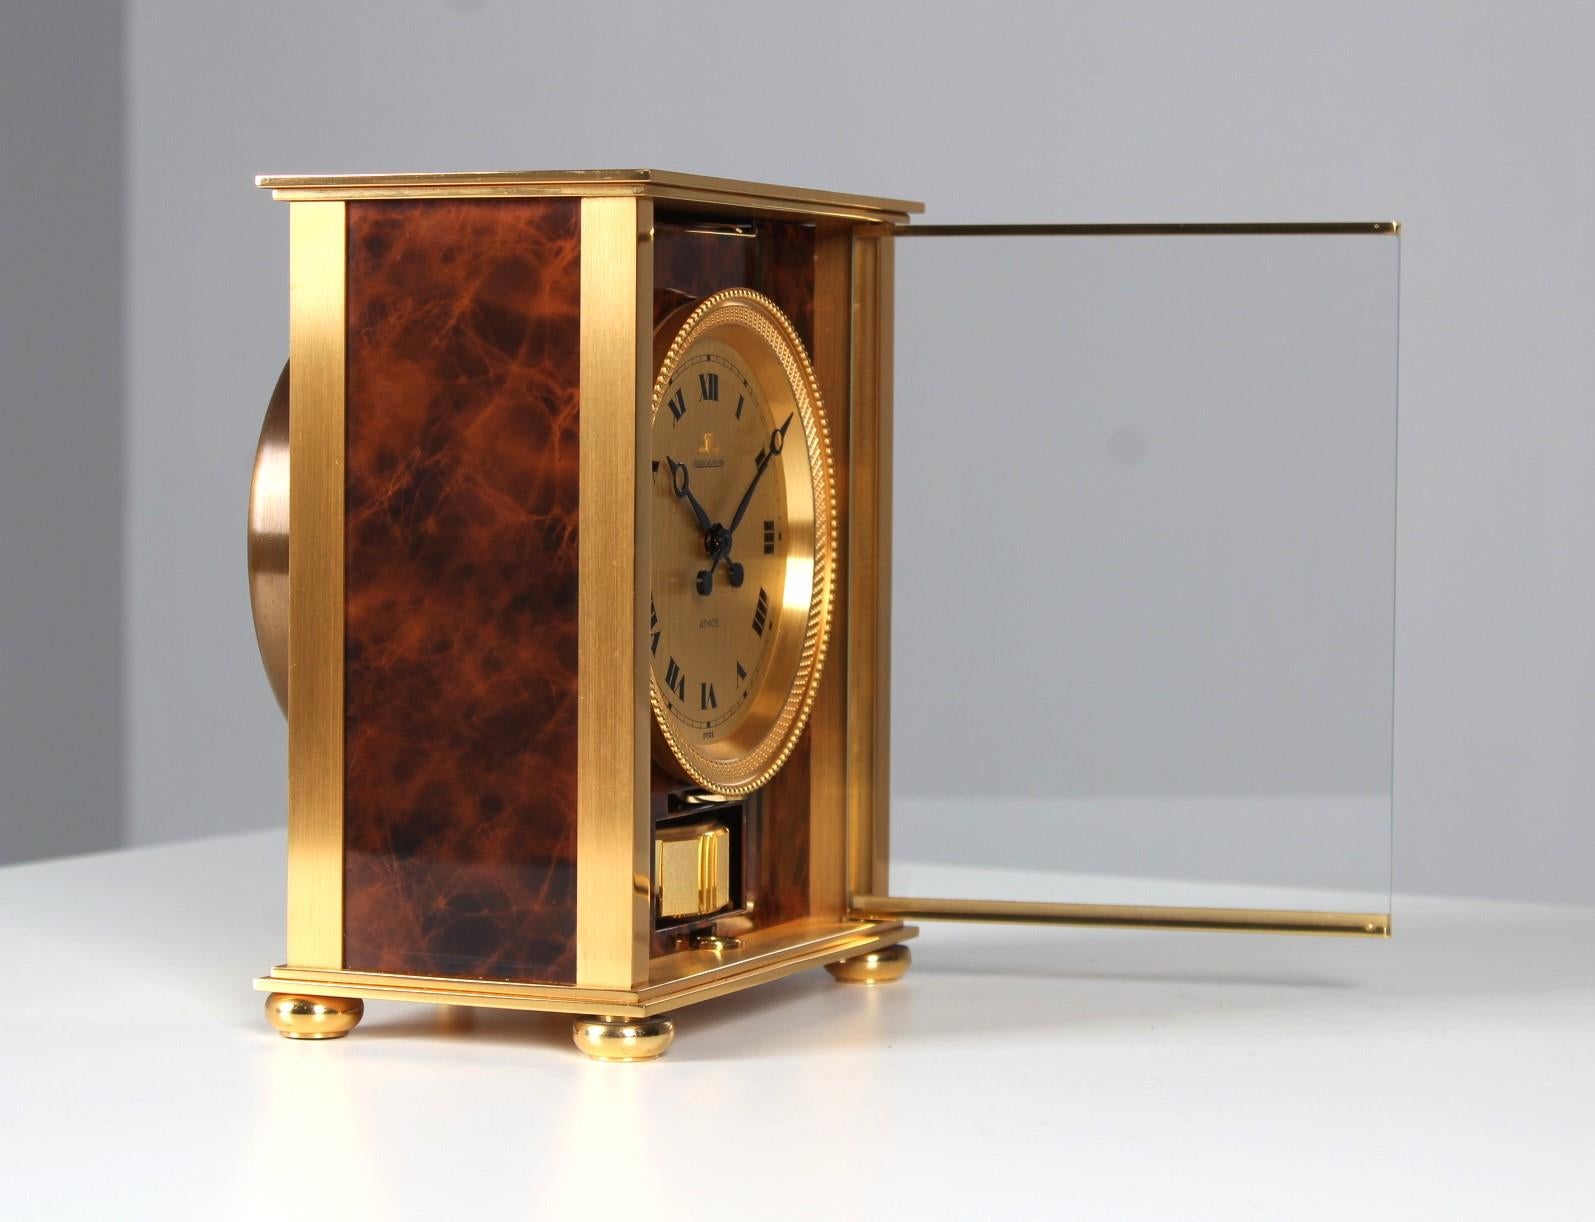 Jaeger LeCoultre - Atmos Elysee 1970s

Switzerland
Brass gold plated
Year of manufacture 1971

Dimensions: H x W x D: 21 x 18 x 11 cm

Description:
Atmos Elysee by Jaeger LeCoultre in gold plated brass case with lacquered sides.
Gold